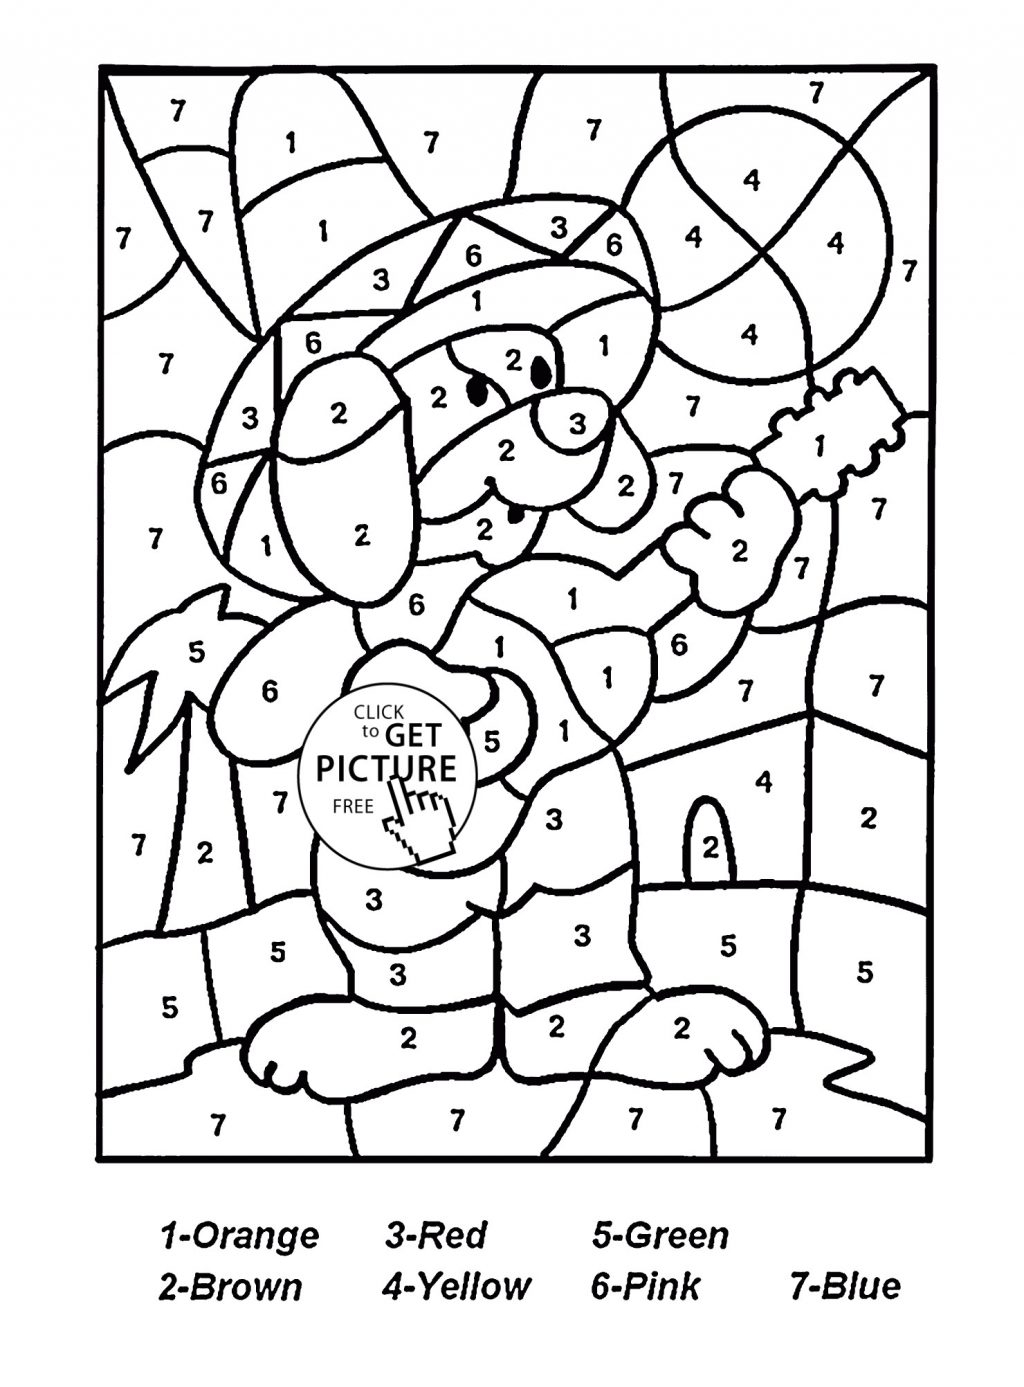 Color Orange Coloring Pages Coloring Pages Printable Paint Number Coloring Pages The Most